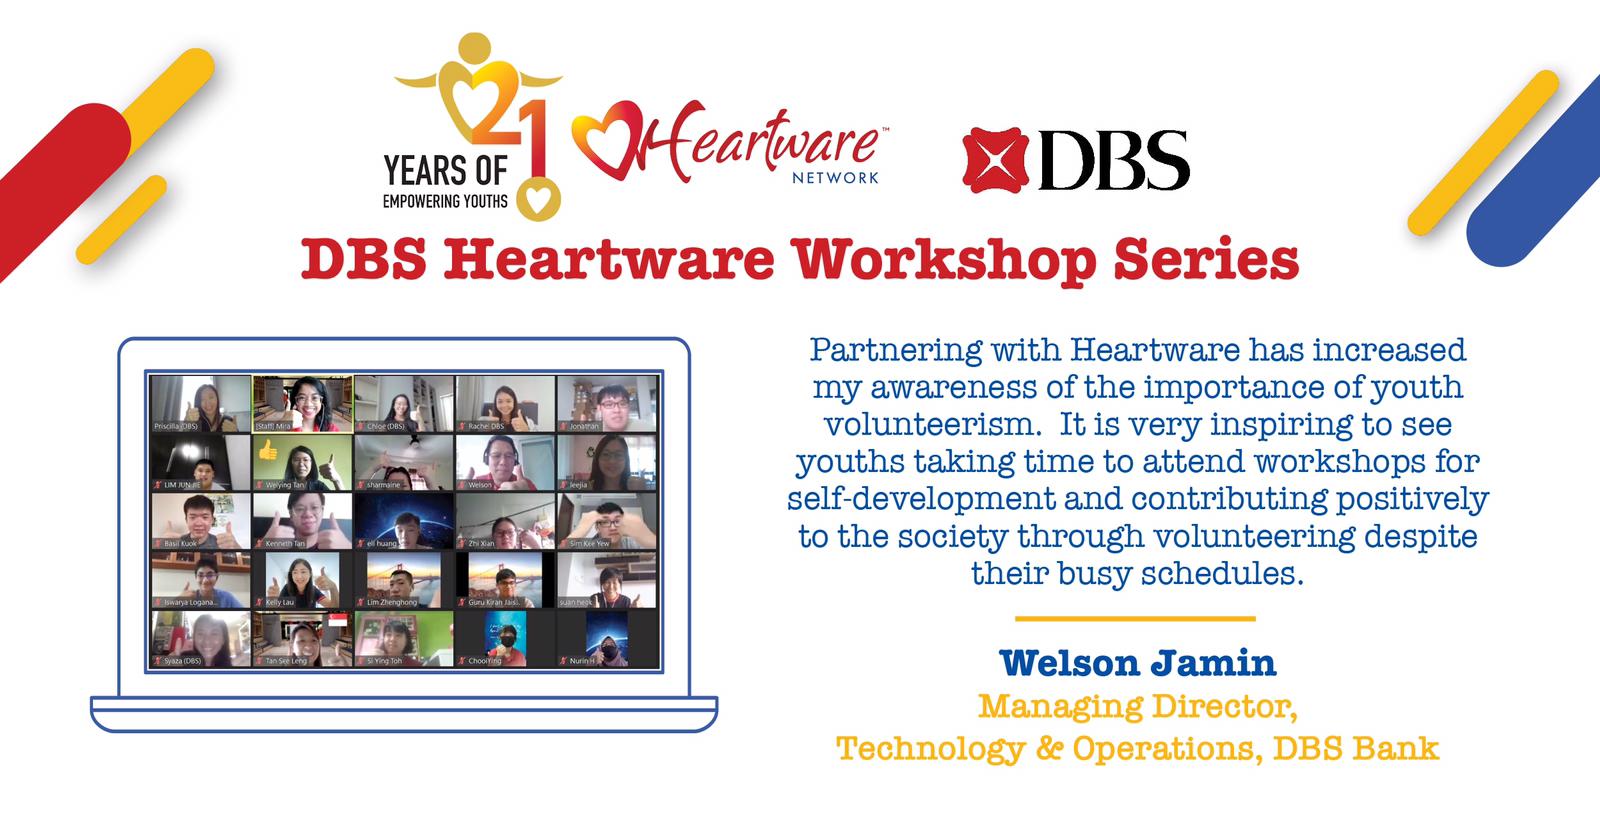 DBS Bank Collaborates with Heartware Network to Develop Youths